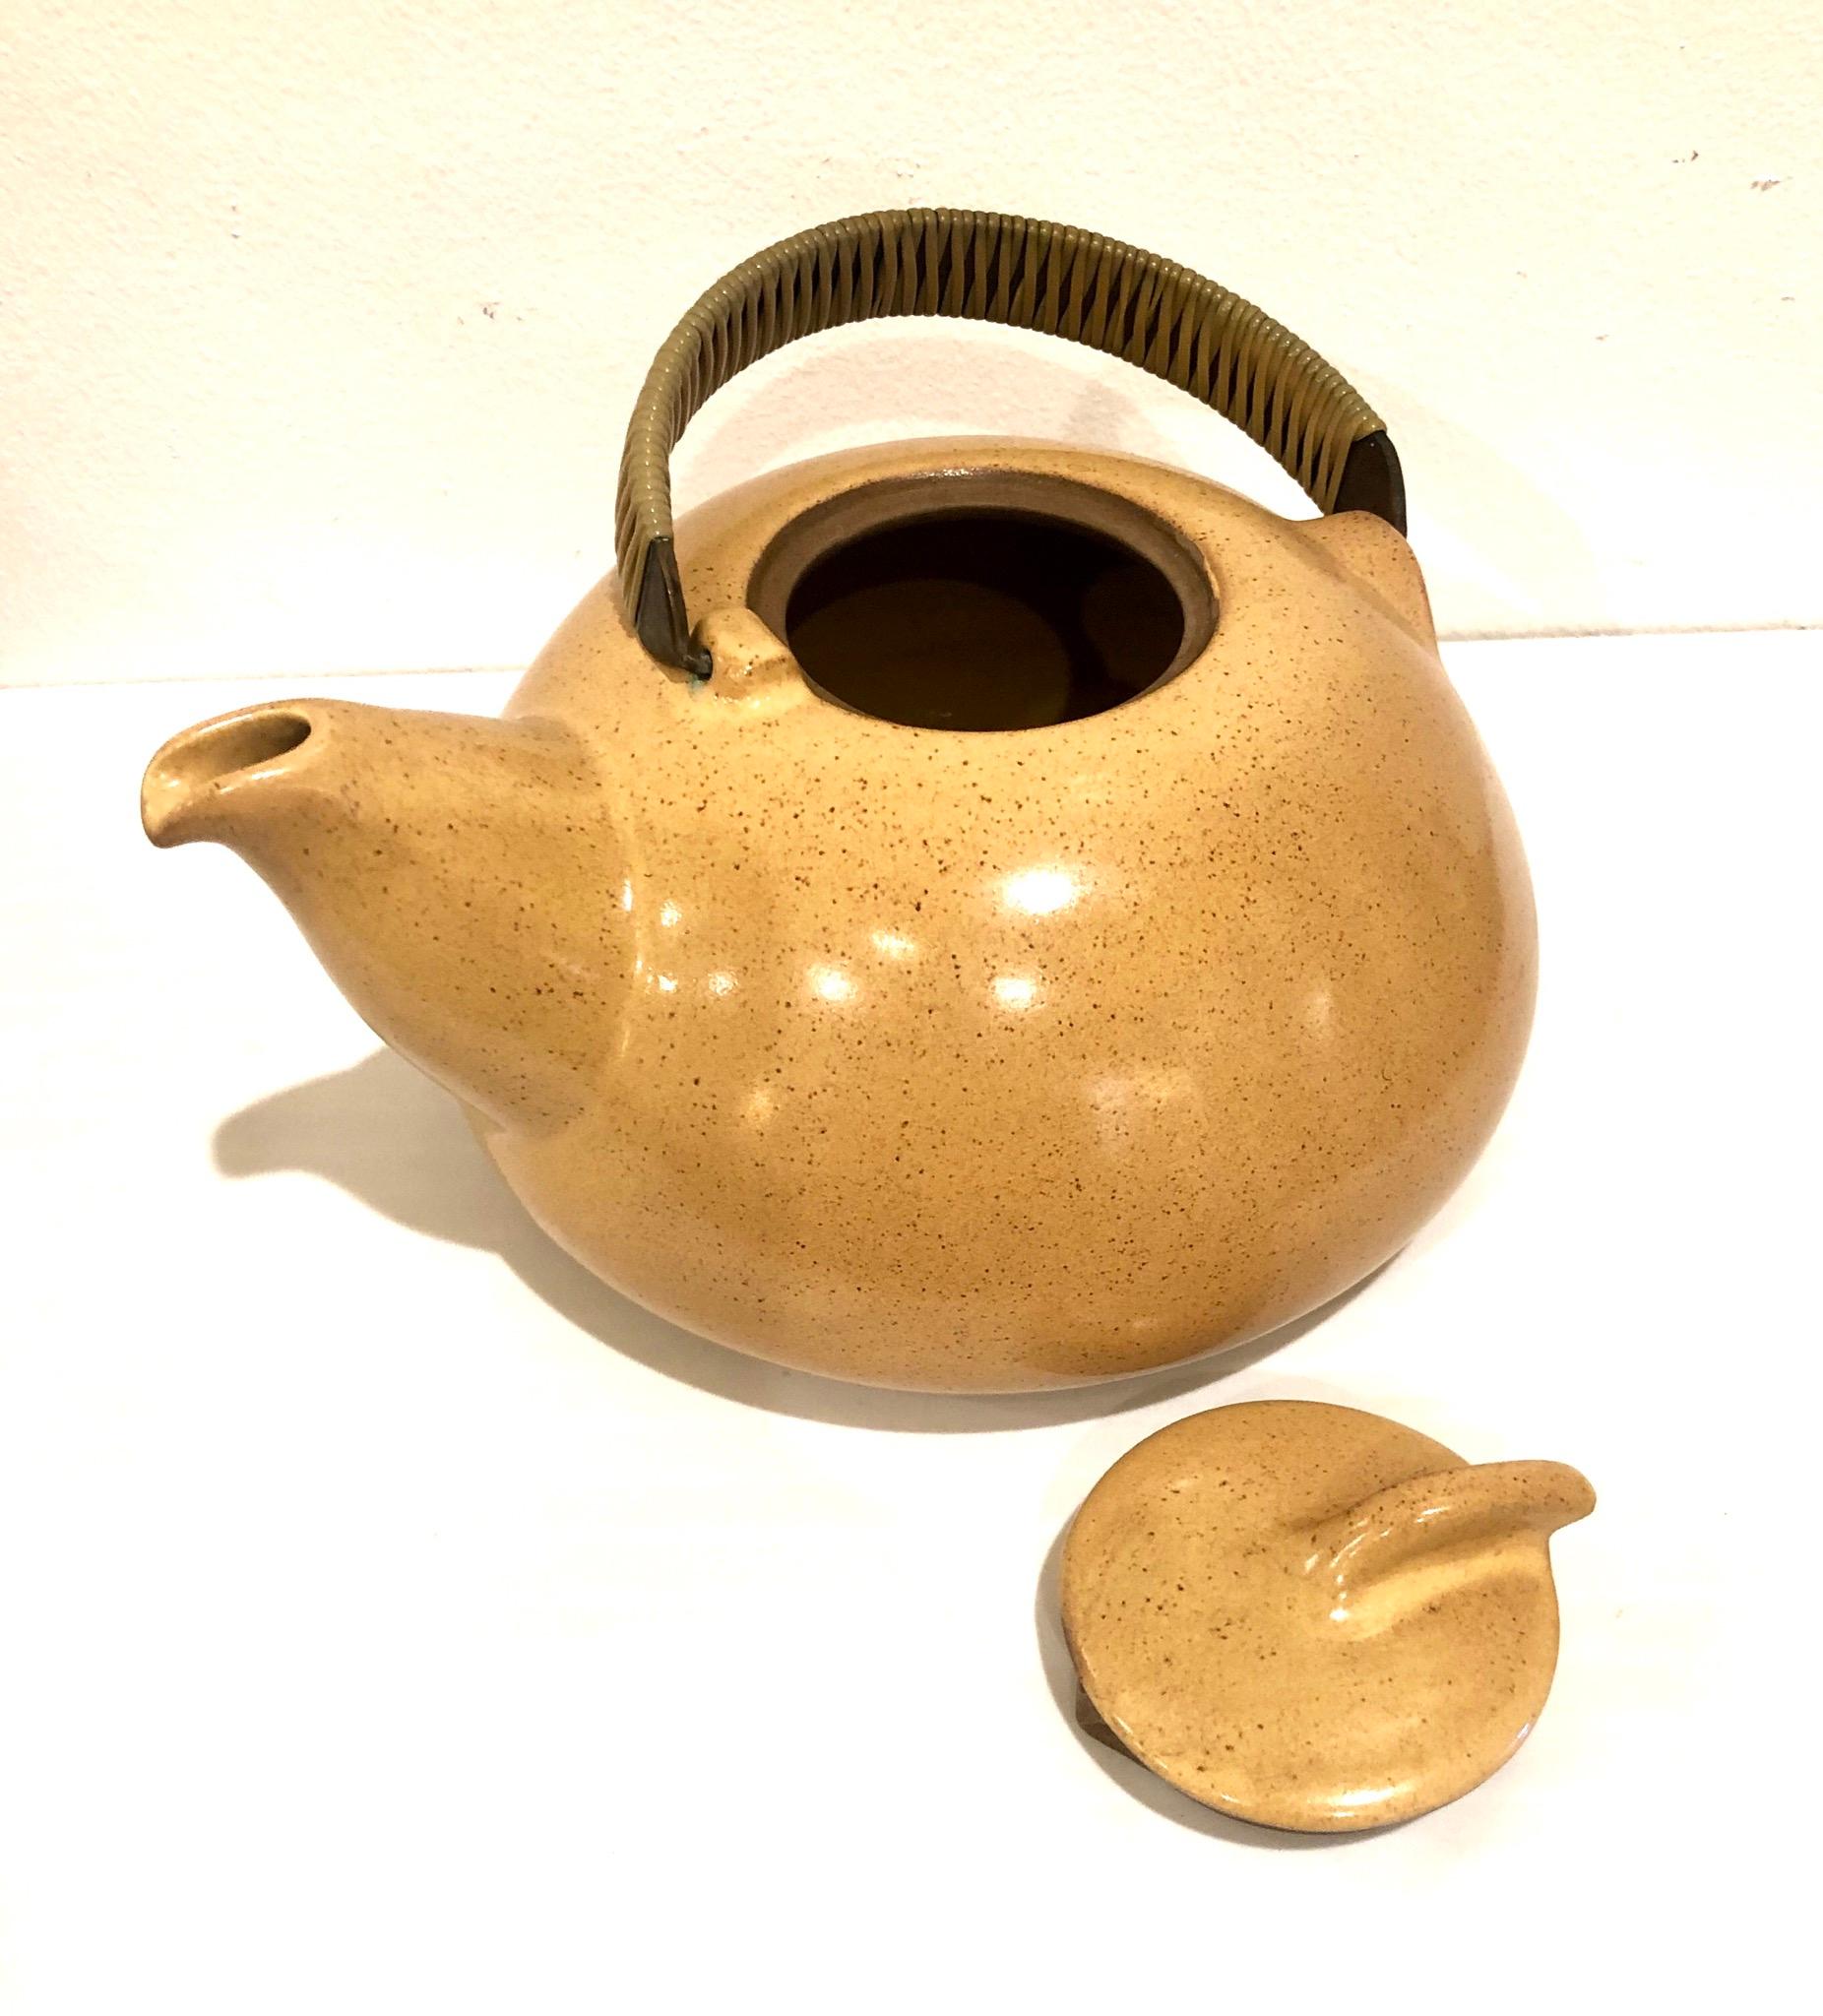 Beautiful and rare teapot design by Heath Ceramics of San Francisco California nice lines ceramic piece with copper handle wrapped no chips or cracks and beautiful color.